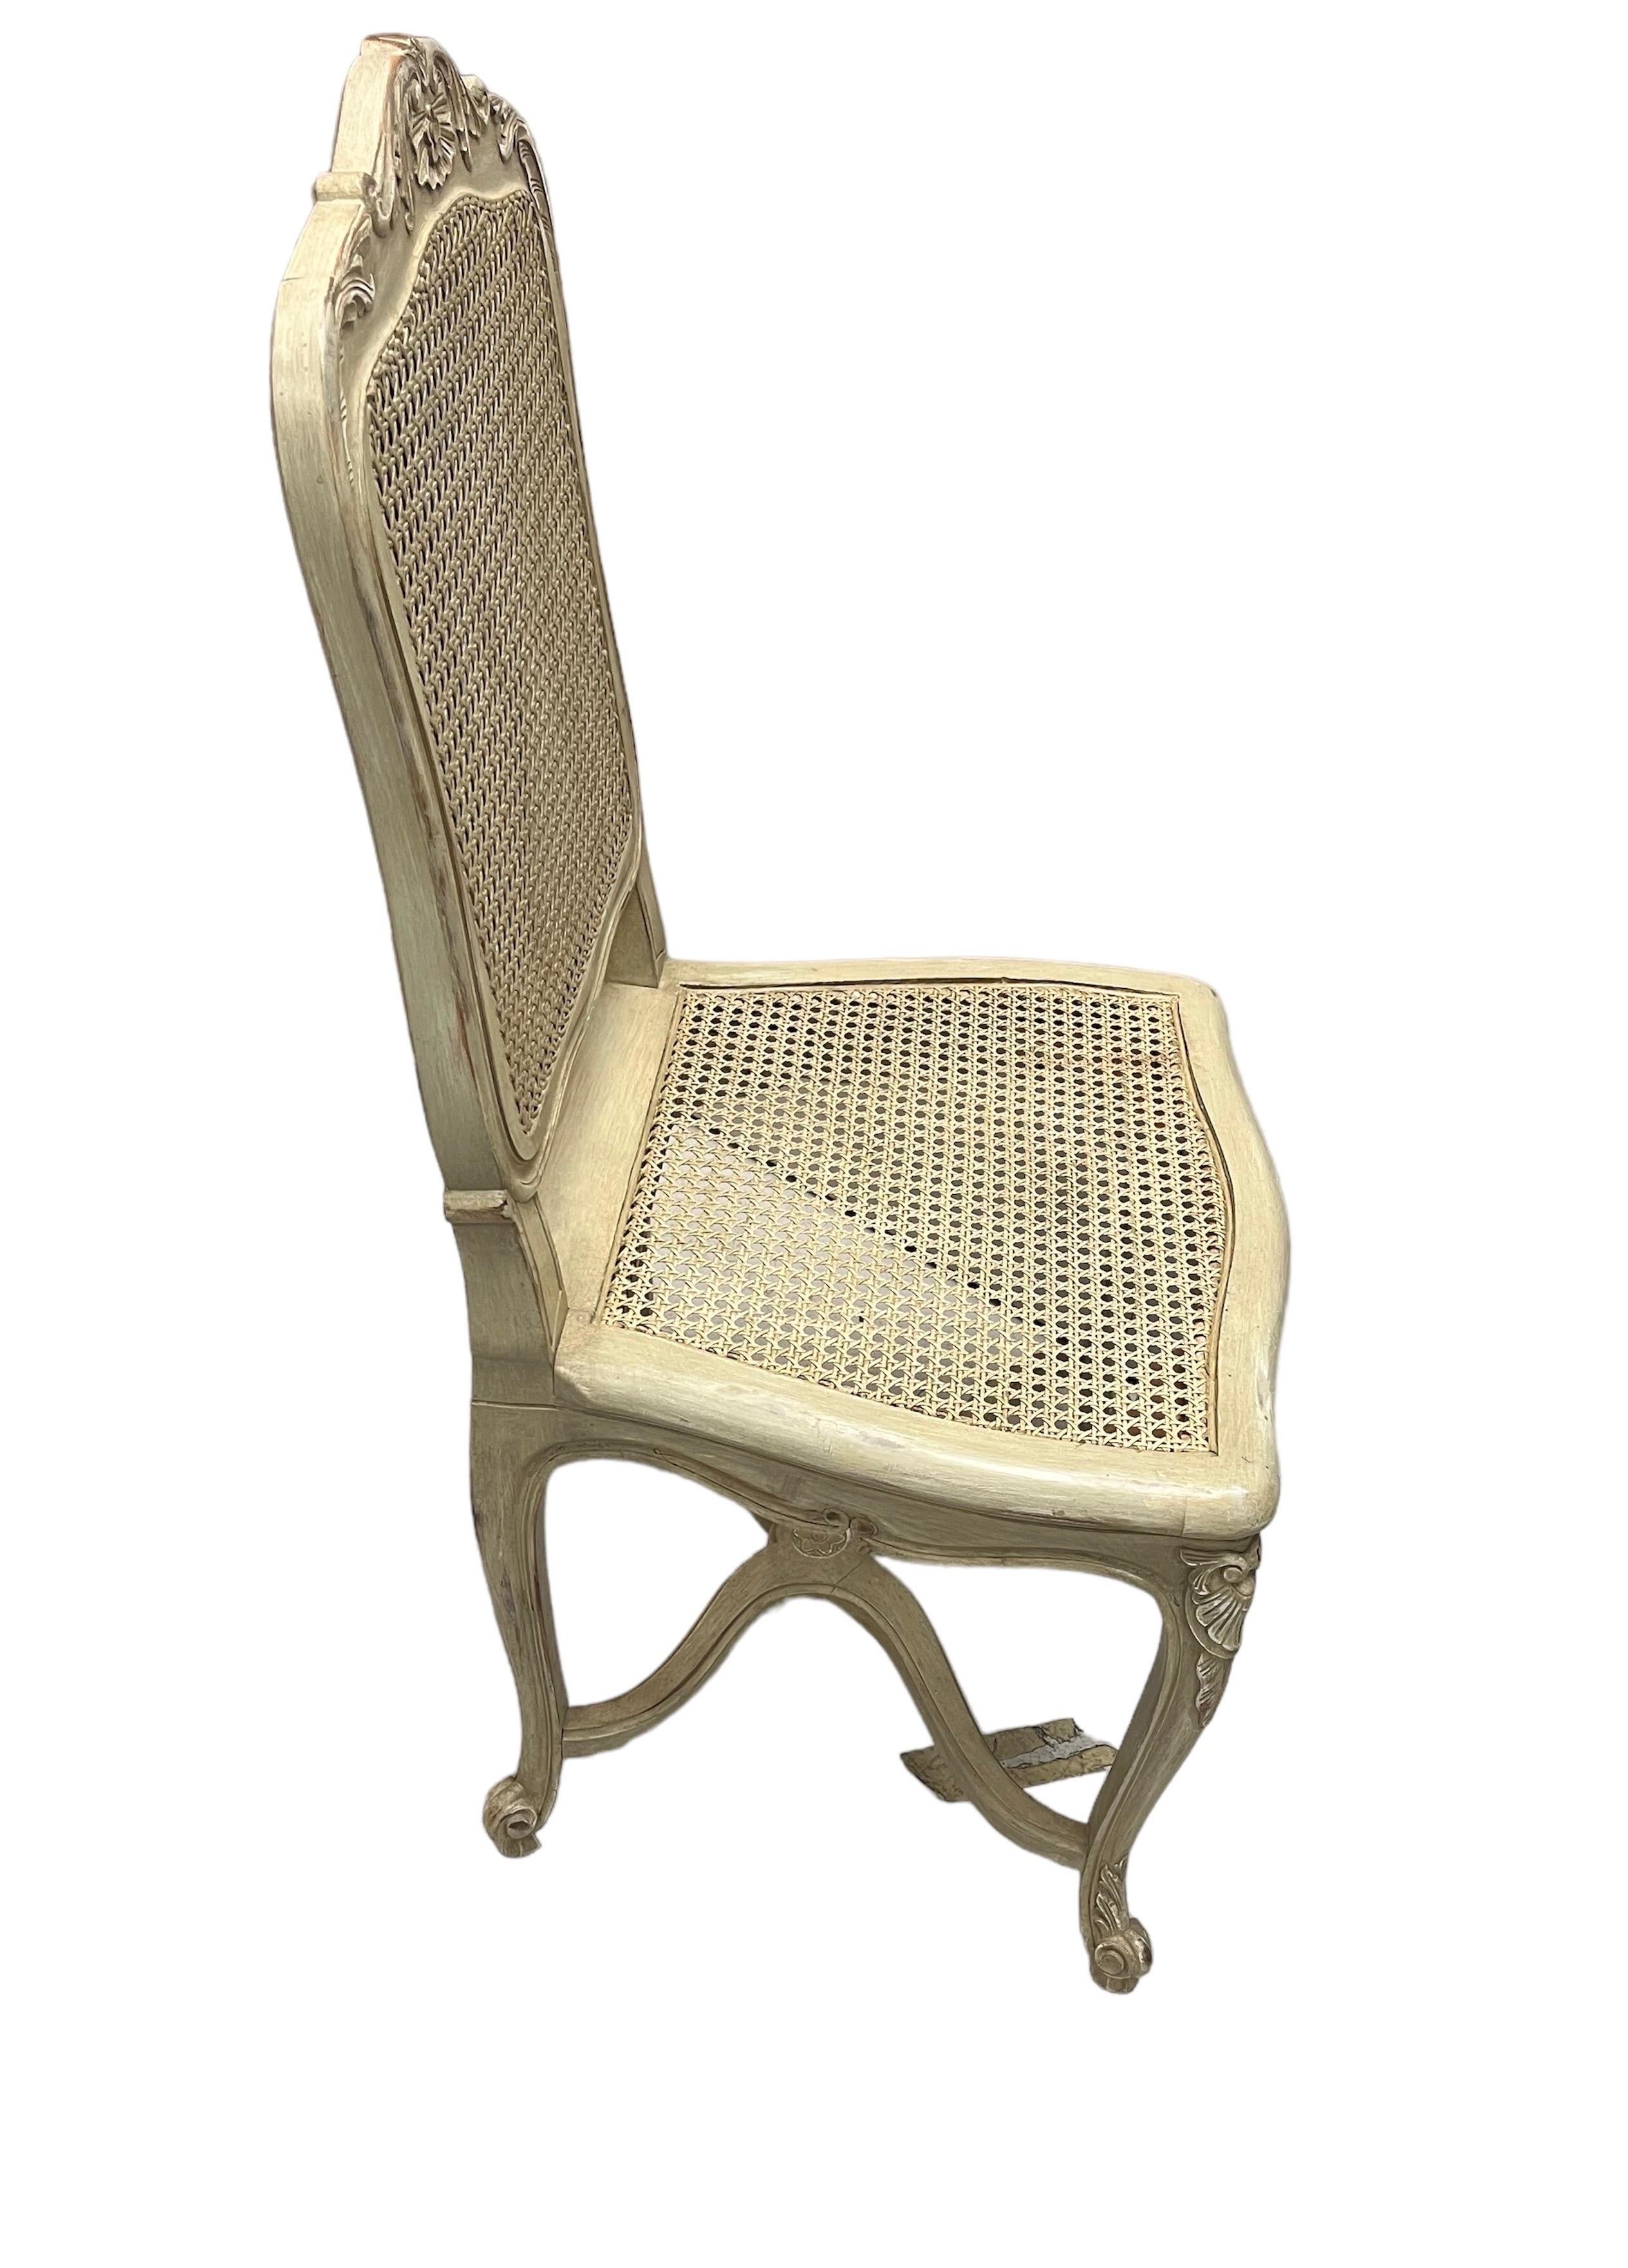 Caned & Painted Régence Style Chairs, 2 Arm 10 Side  For Sale 9